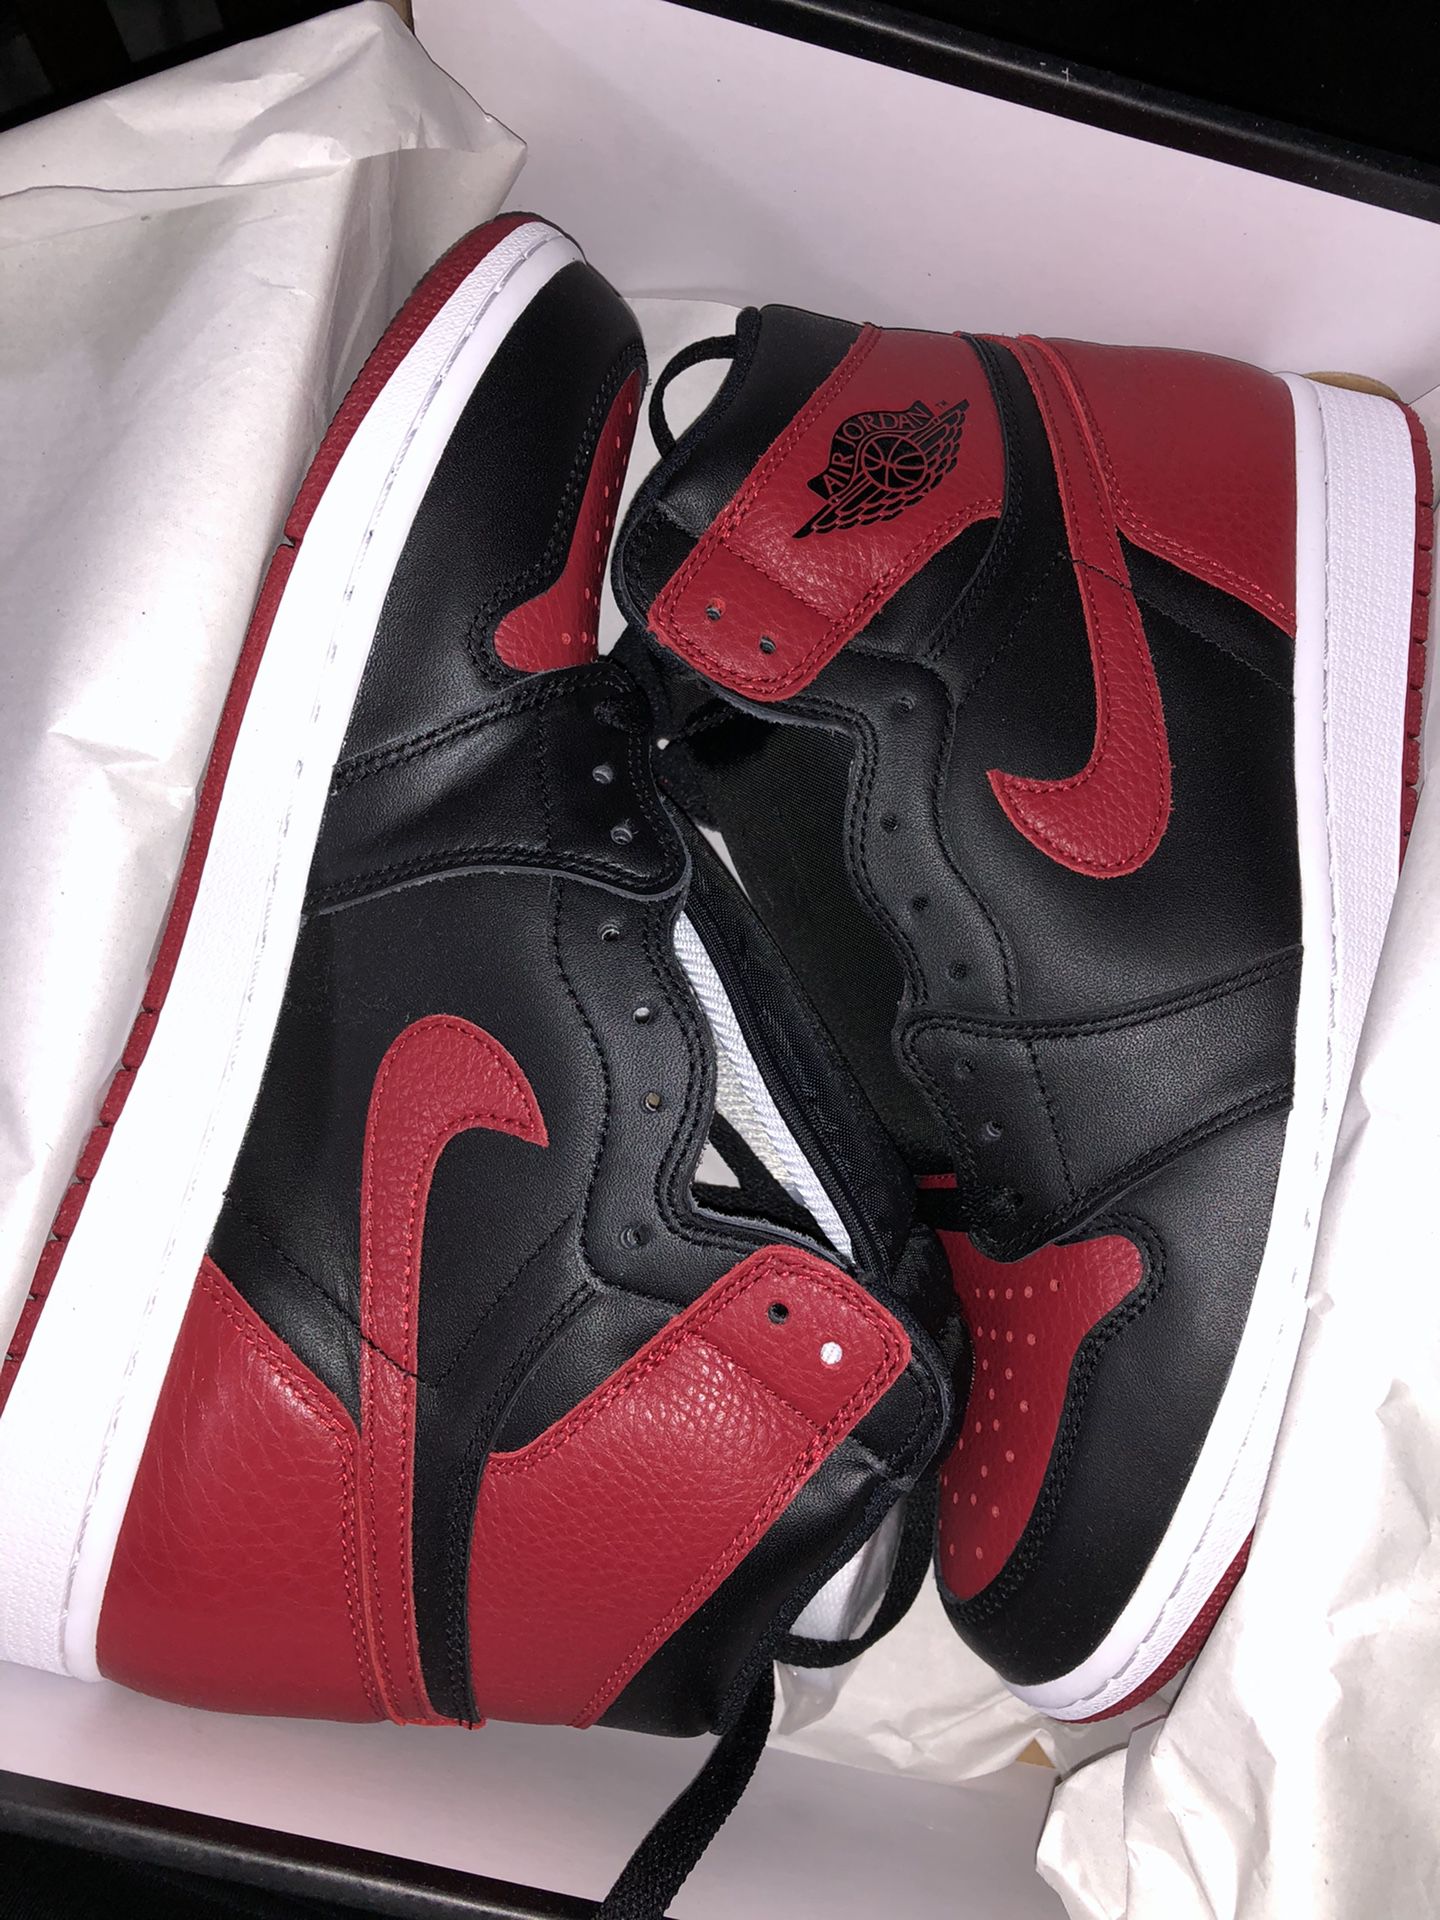 Barely used banned Jordan 1 Bred 2016 size 10